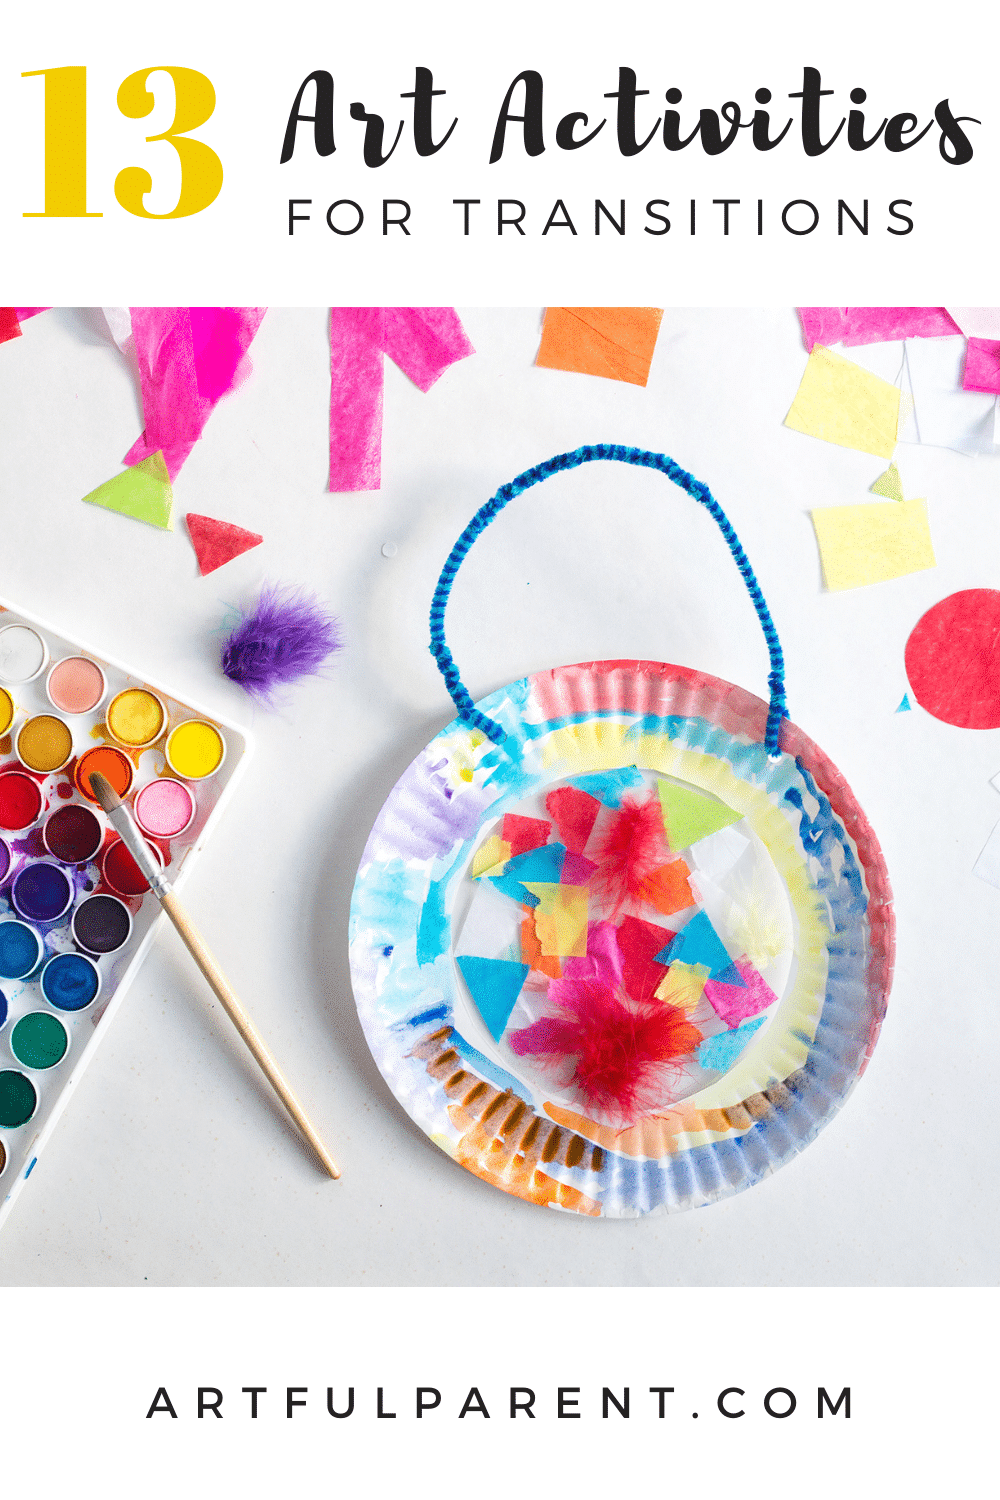 13 Art Activities for Transitions